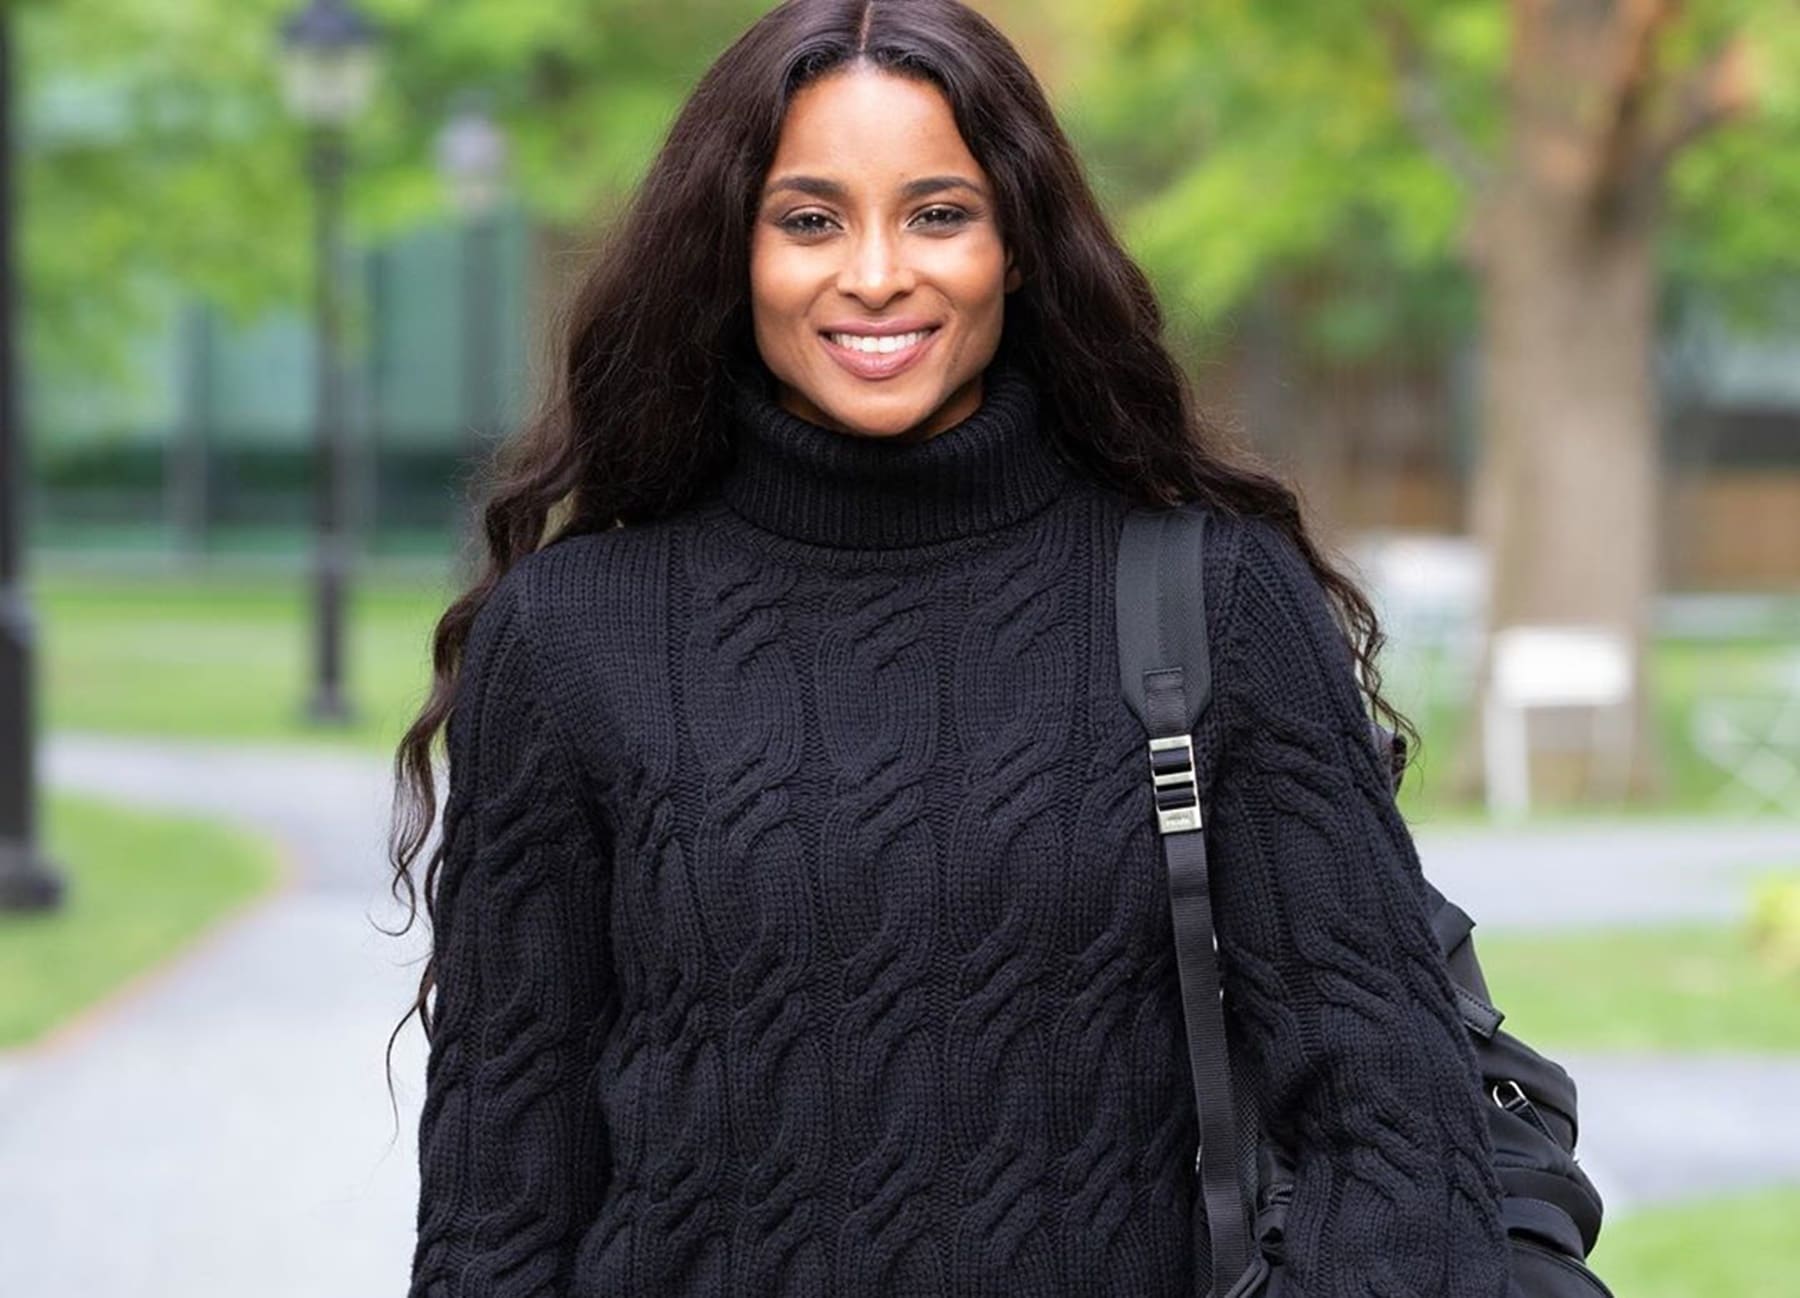 ”ciara-is-mocked-for-this-high-end-photo-shoot-while-studying-at-harvard-find-out-how-long-it-took-russell-wilsons-wife-to-graduate”